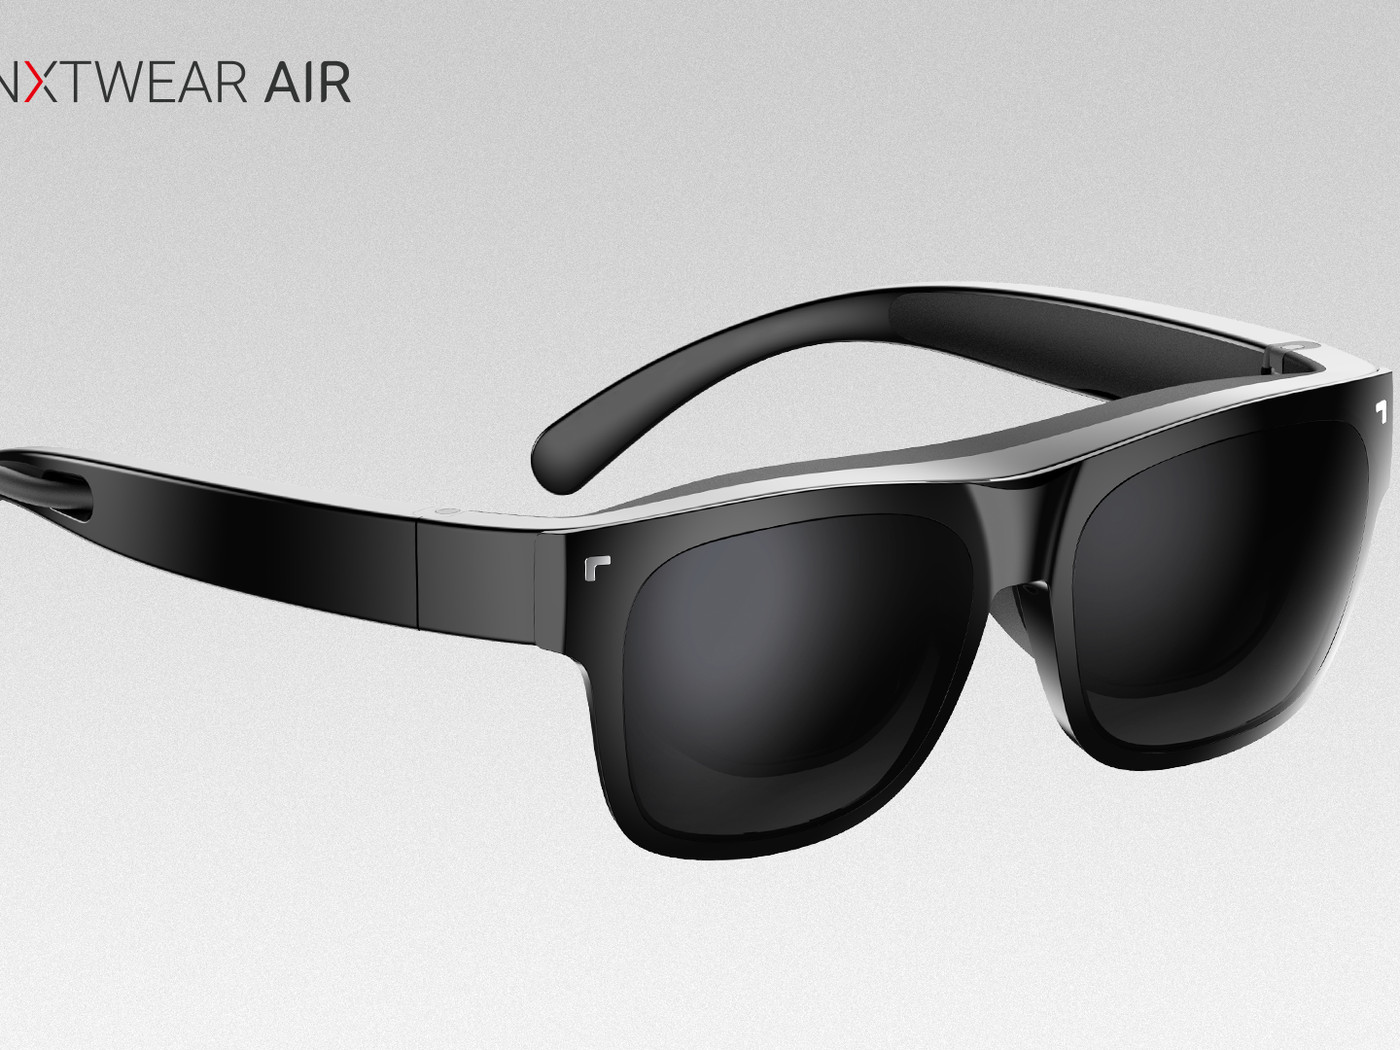 TCL's NxtWear Air wearable display is 30% lighter than last year's 